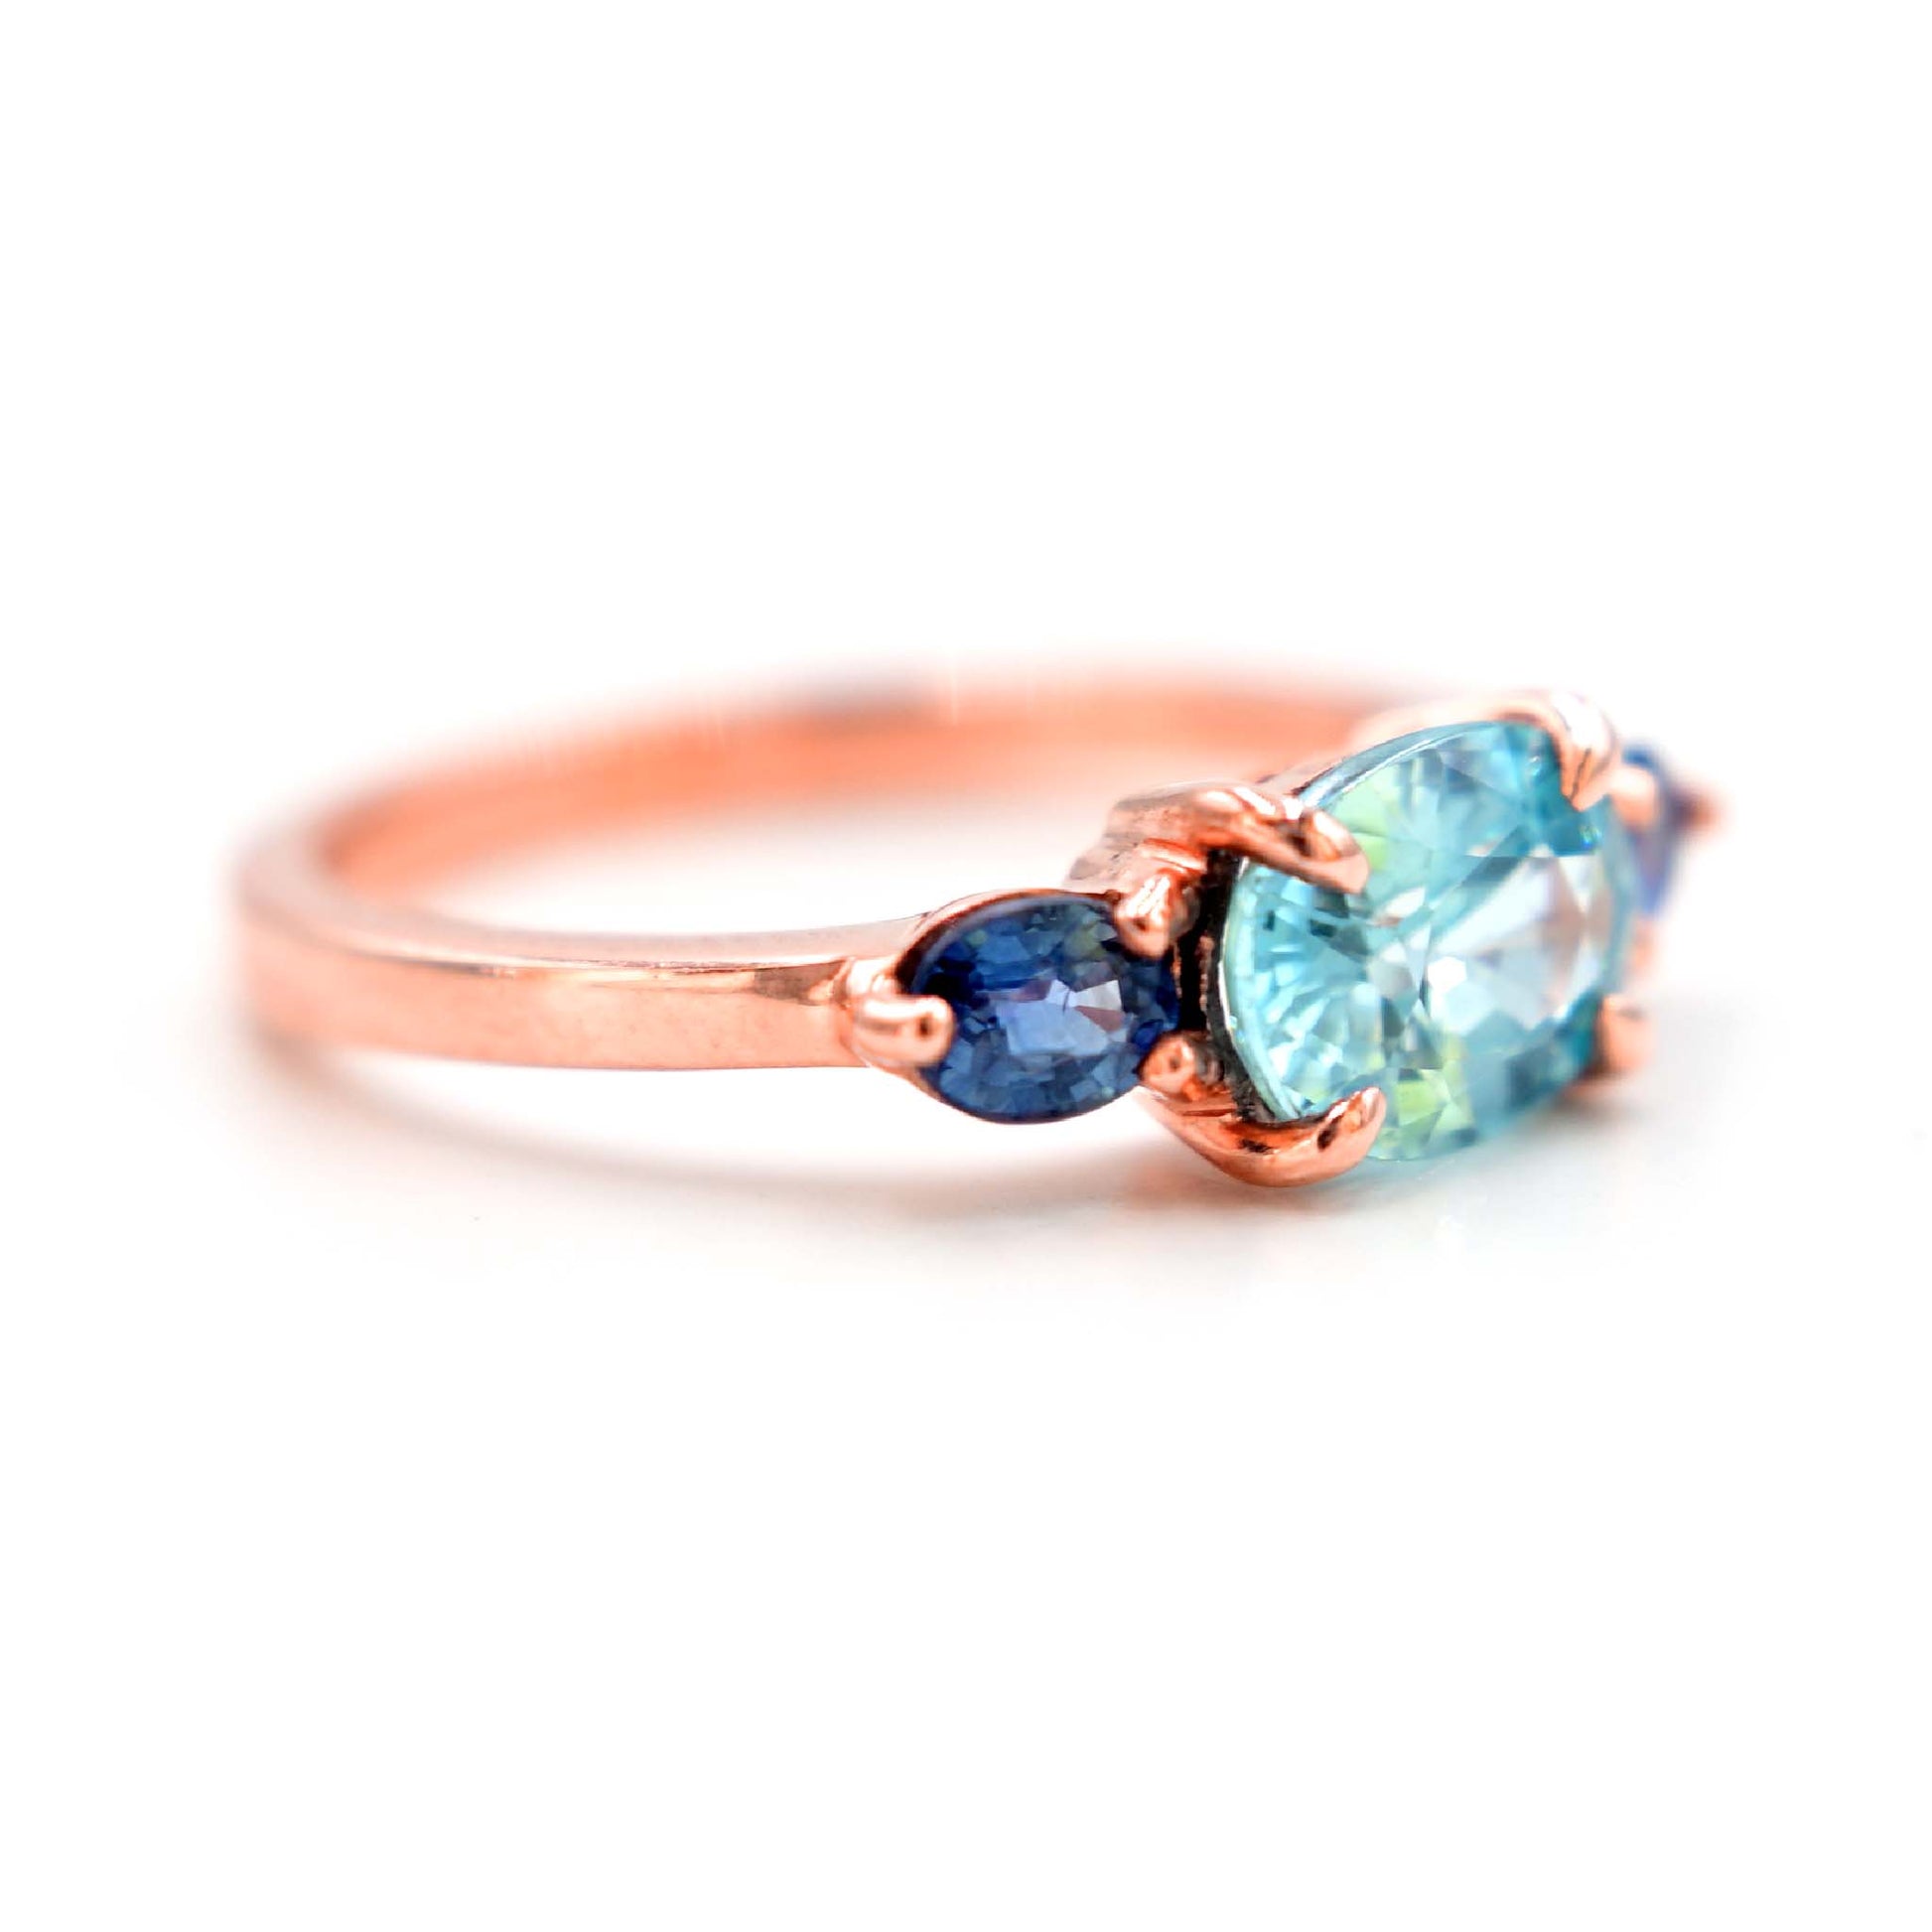 Engagement ring with blue zircon and blue sapphires